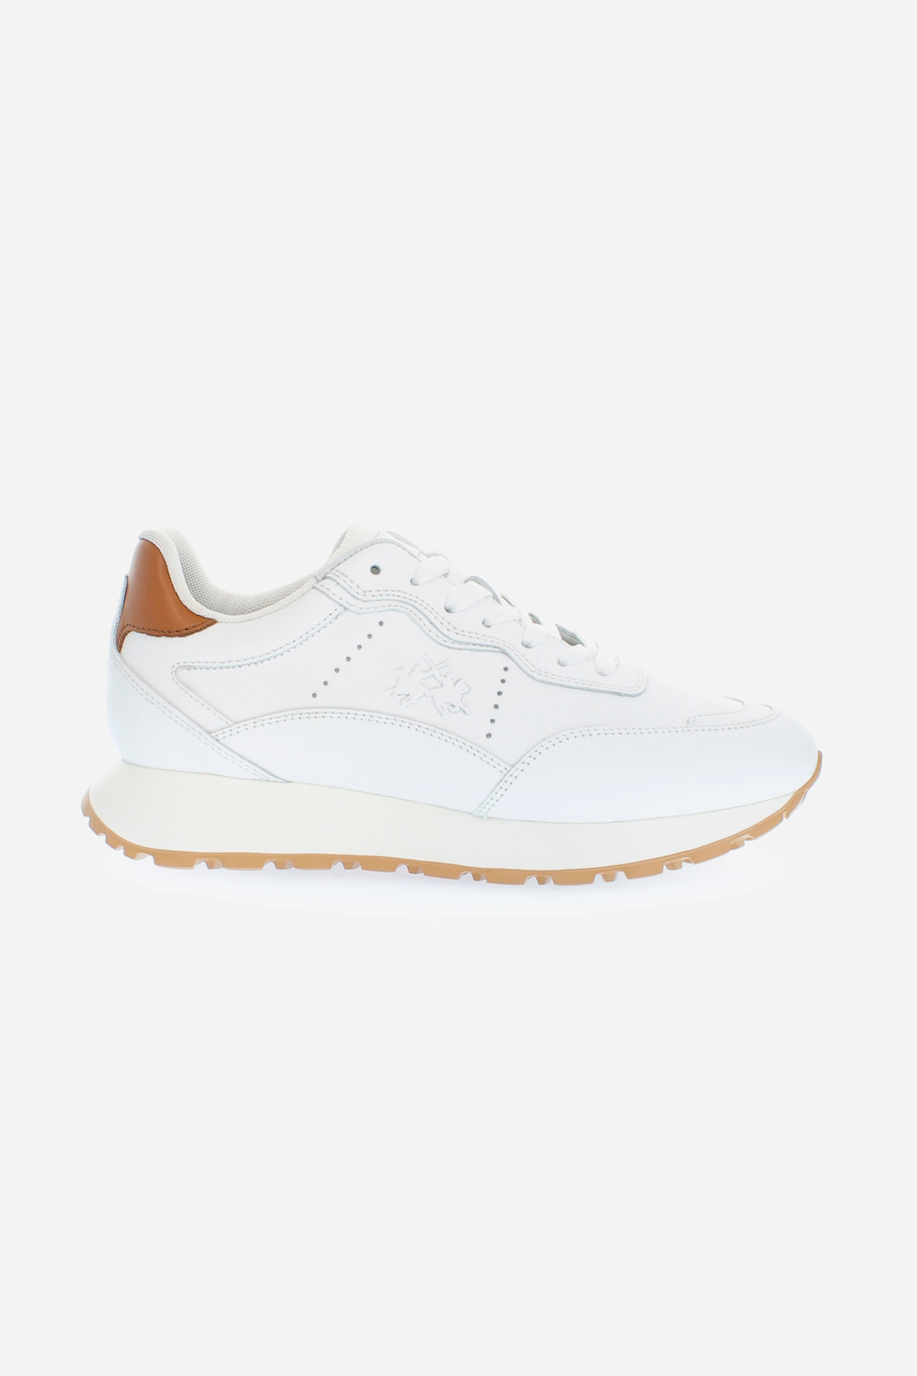 Women's leather trainers with inserts - test | La Martina - Official Online Shop